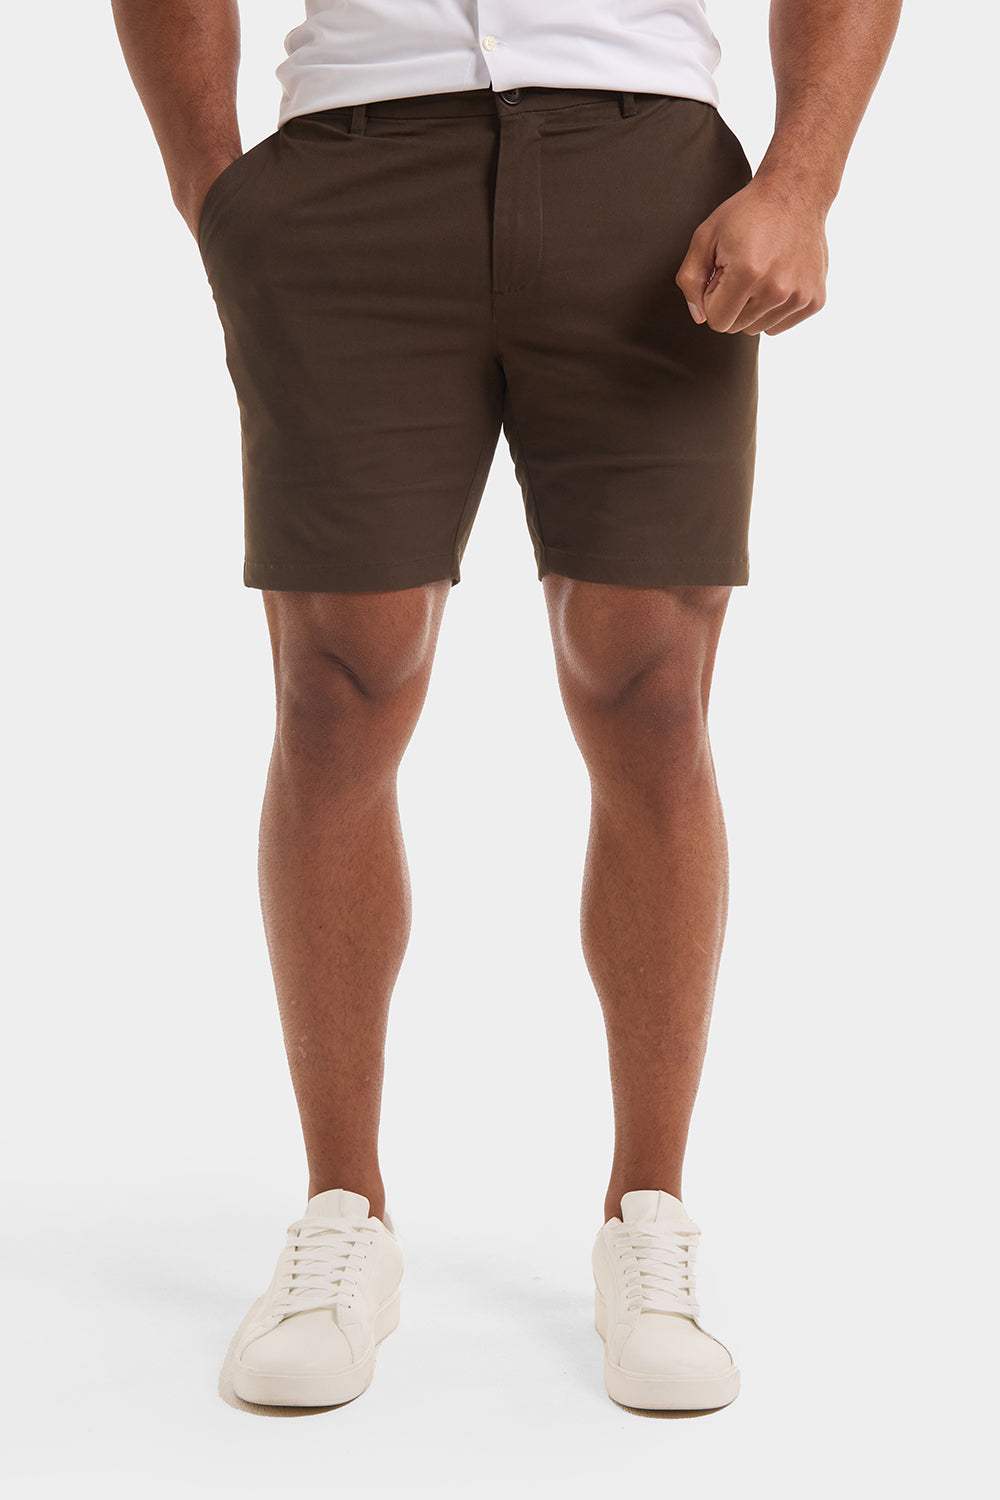 Essential Chino Shorts in Sand - TAILORED ATHLETE - USA